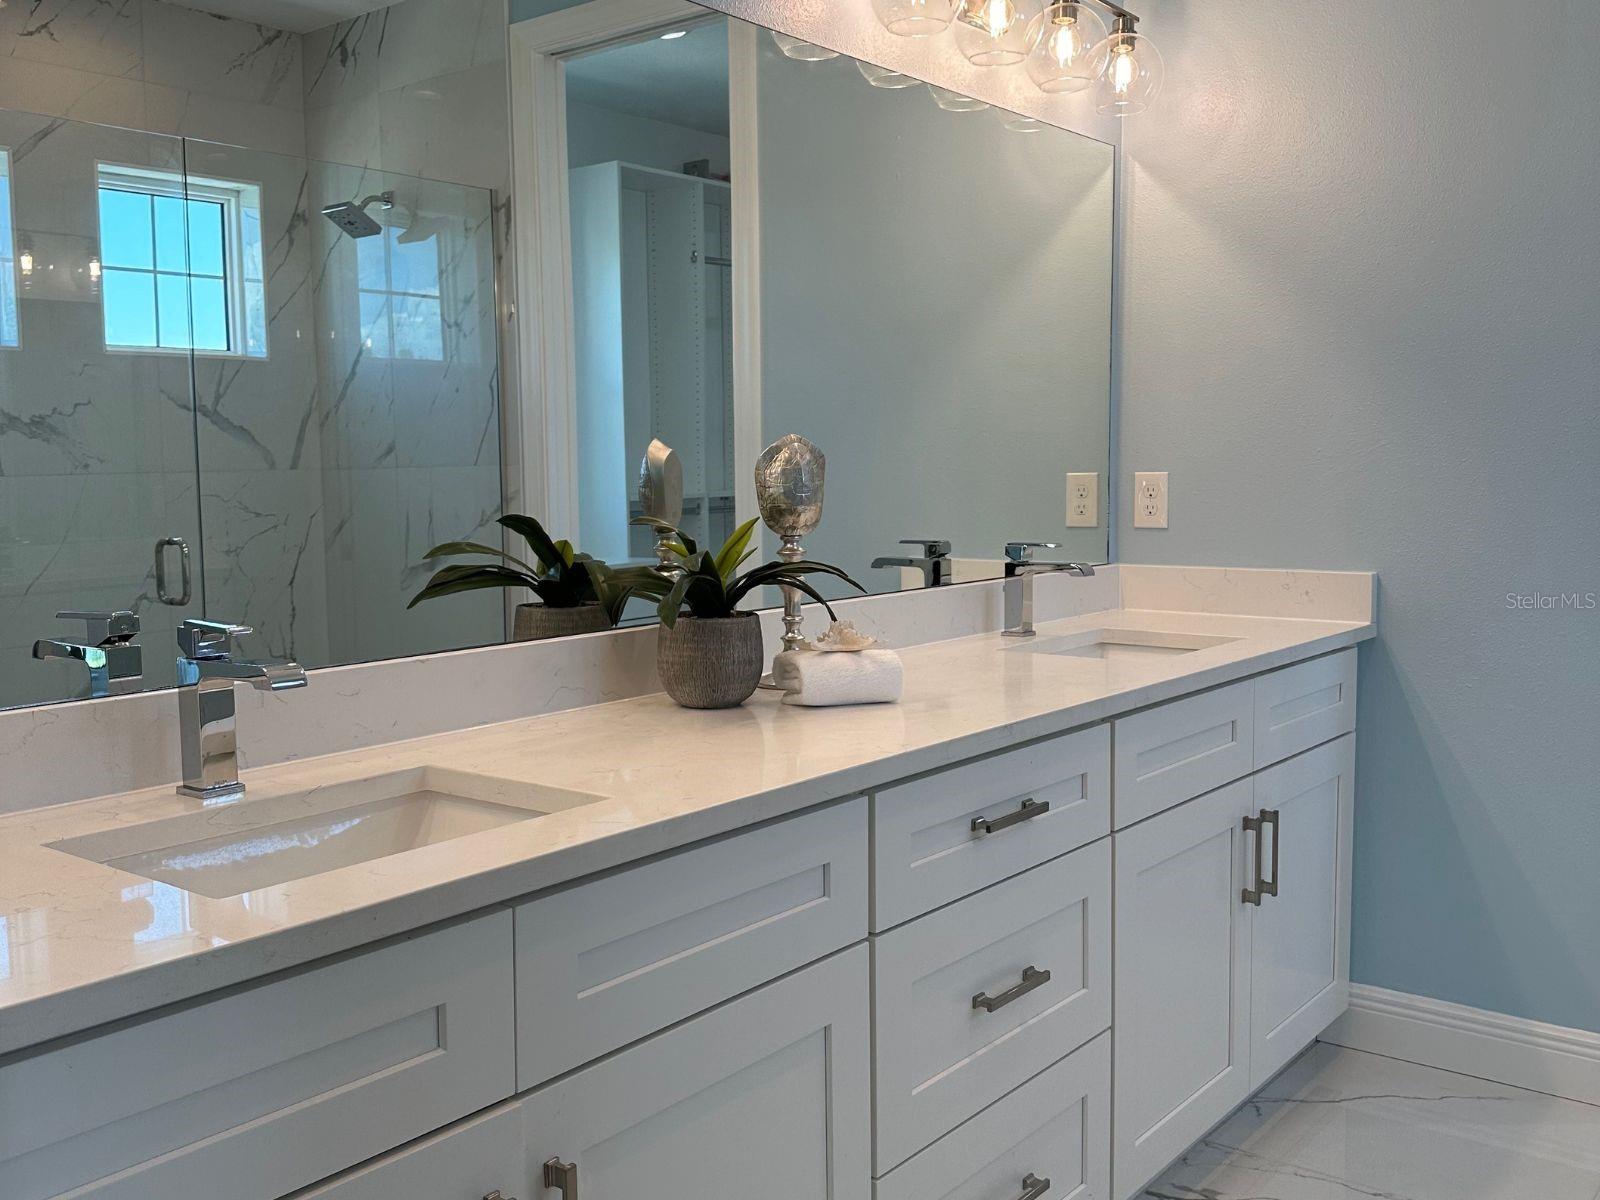 Luxuriate in the en-suite's massive shower, complemented by stone countertops and a dual sink vanity, where every detail is meticulously crafted to enhance your relaxation and elevate your daily routine in this coastal oasis of comfort and style.